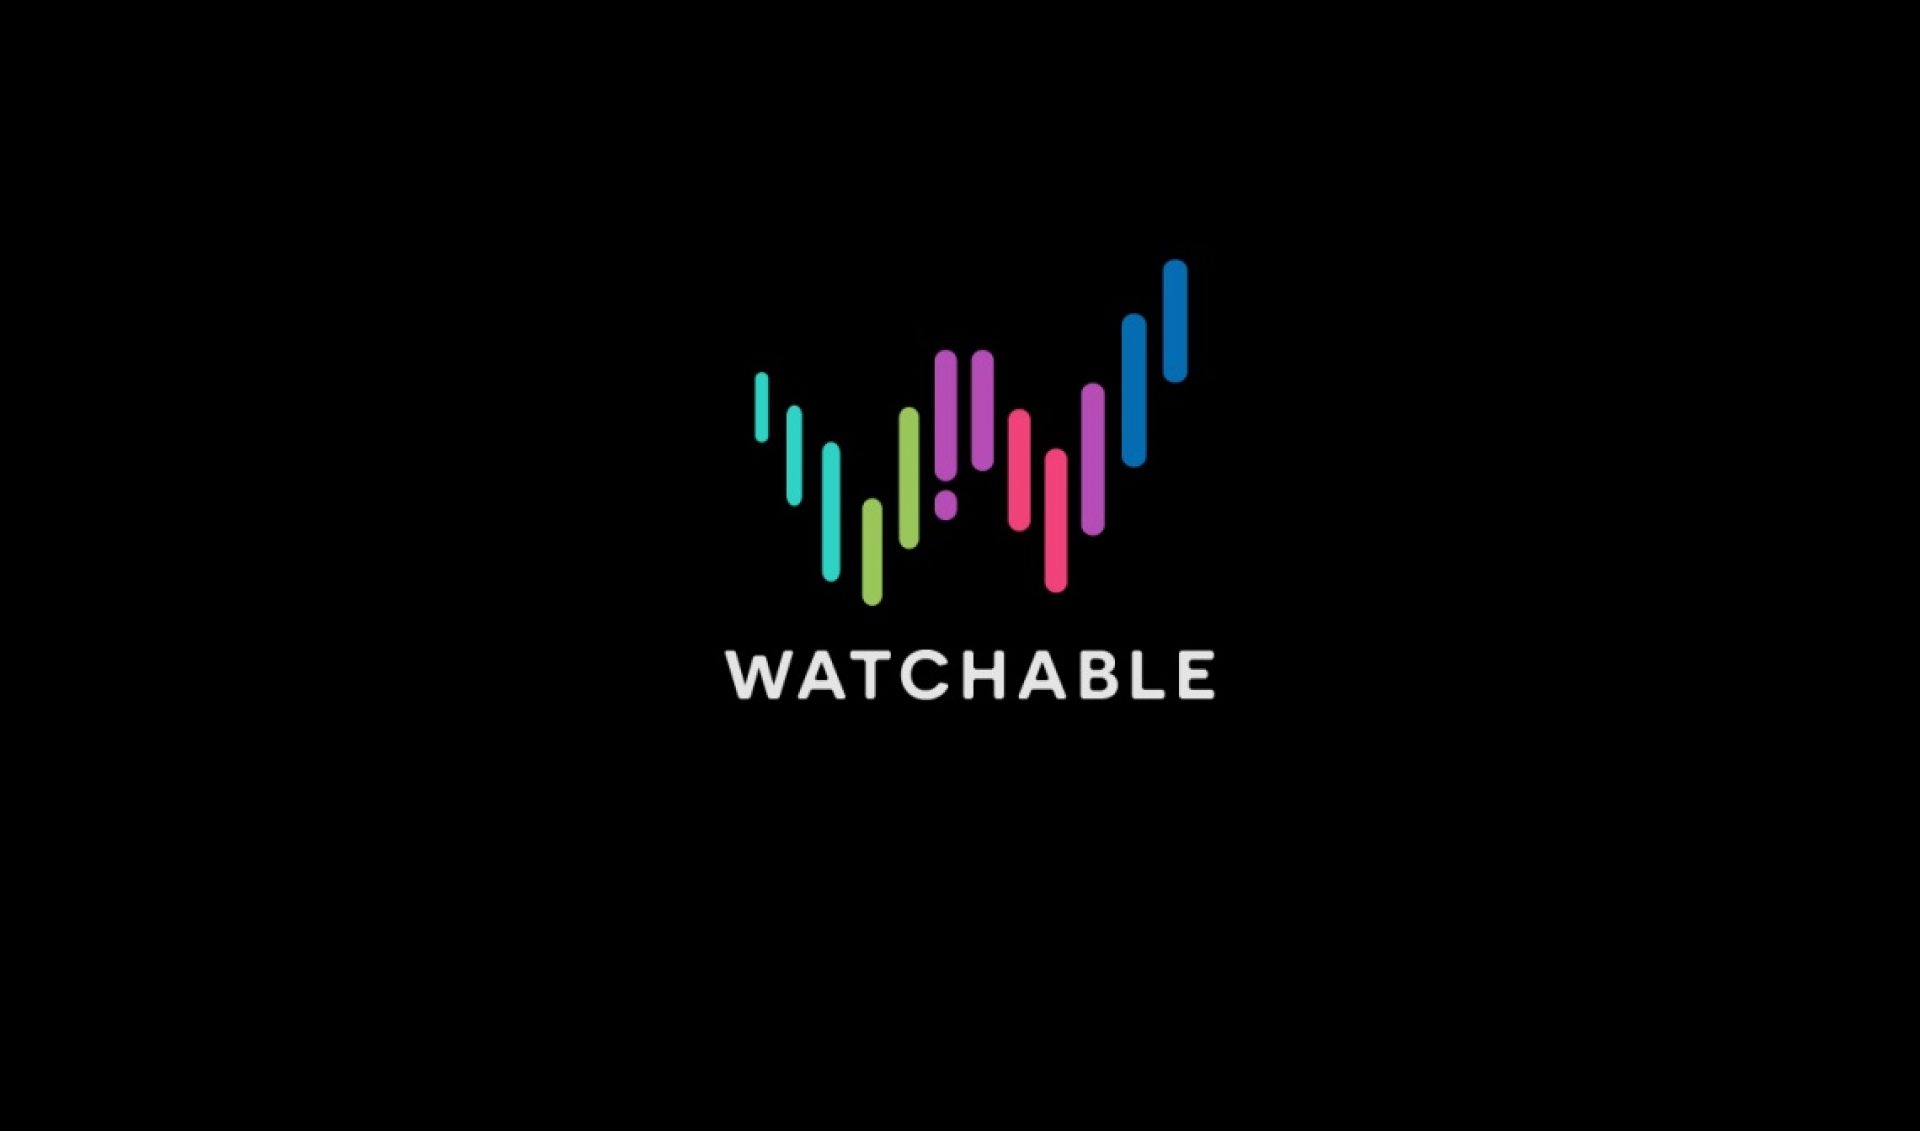 Comcast’s Watchable Platform Premieres Exclusive Shows From Refinery29, Mitú, and Cut.com